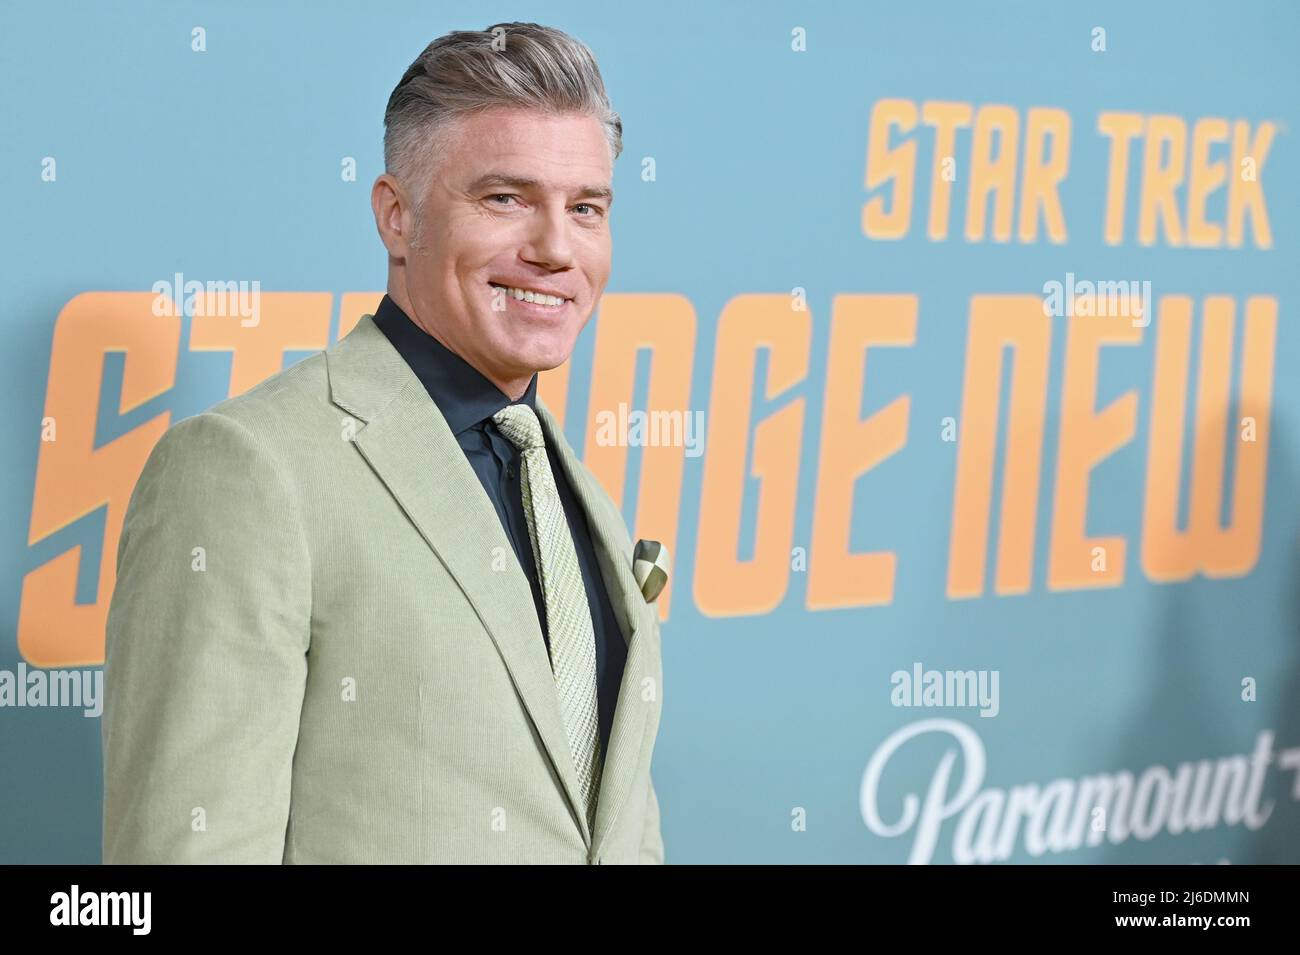 Actor Anson Mount attends the Star Trek: Strange New Worlds NYC Premiere at AMC Lincoln Square, New York, NY, April 30, 2022. (Photo by Anthony Behar/Sipa USA) Stock Photo